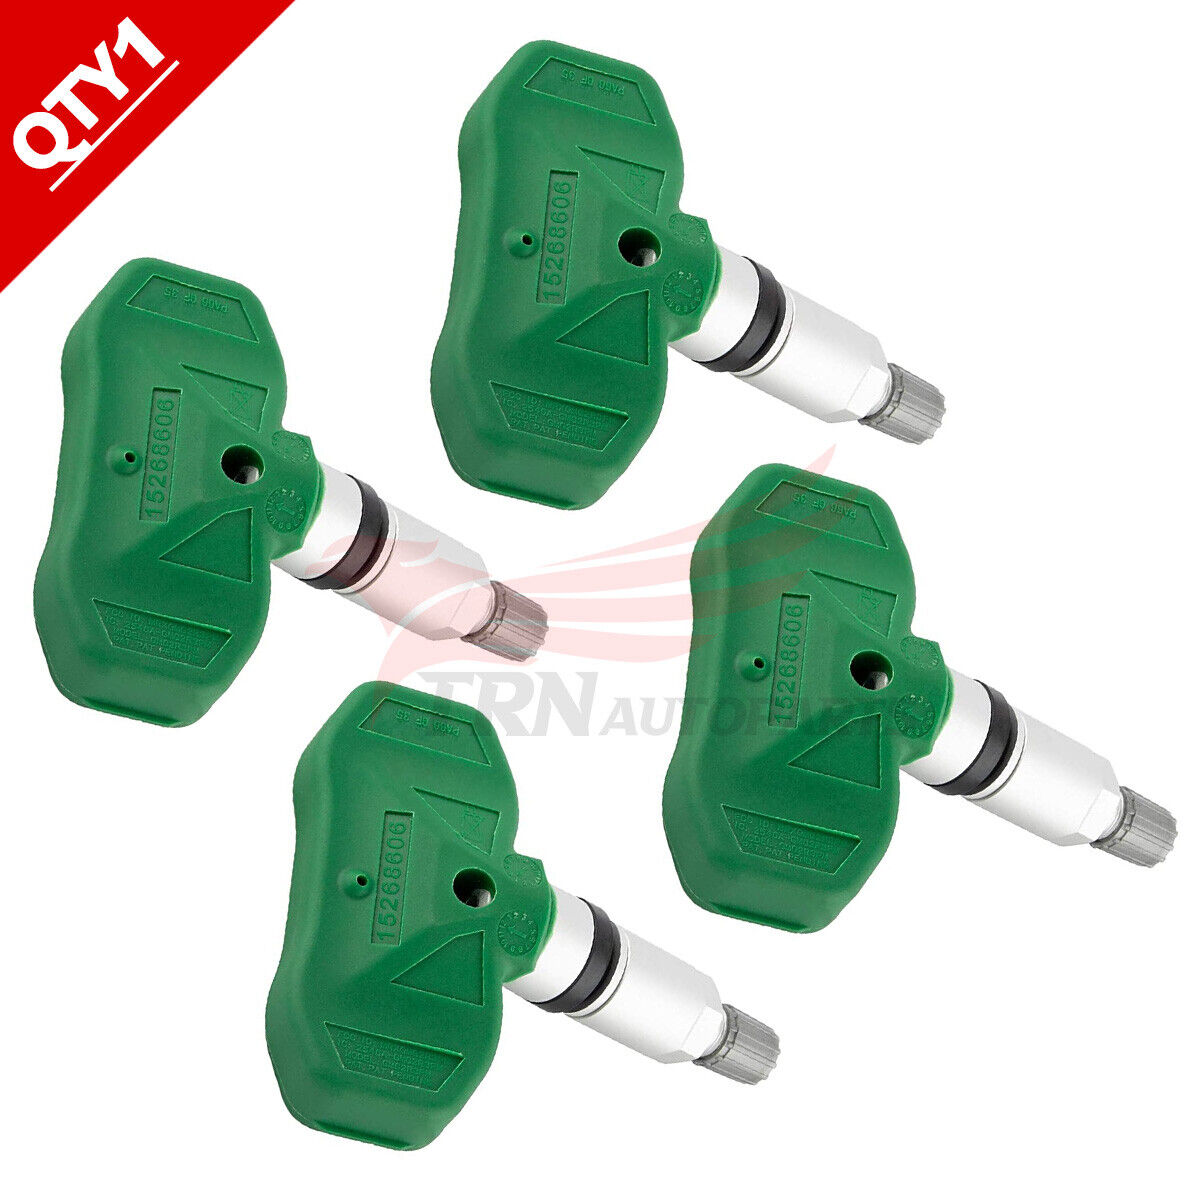 NEW 4x 15268606 Tire Pressure Sensor TPMS For GM Cadillac CTS Buick Chevry Green